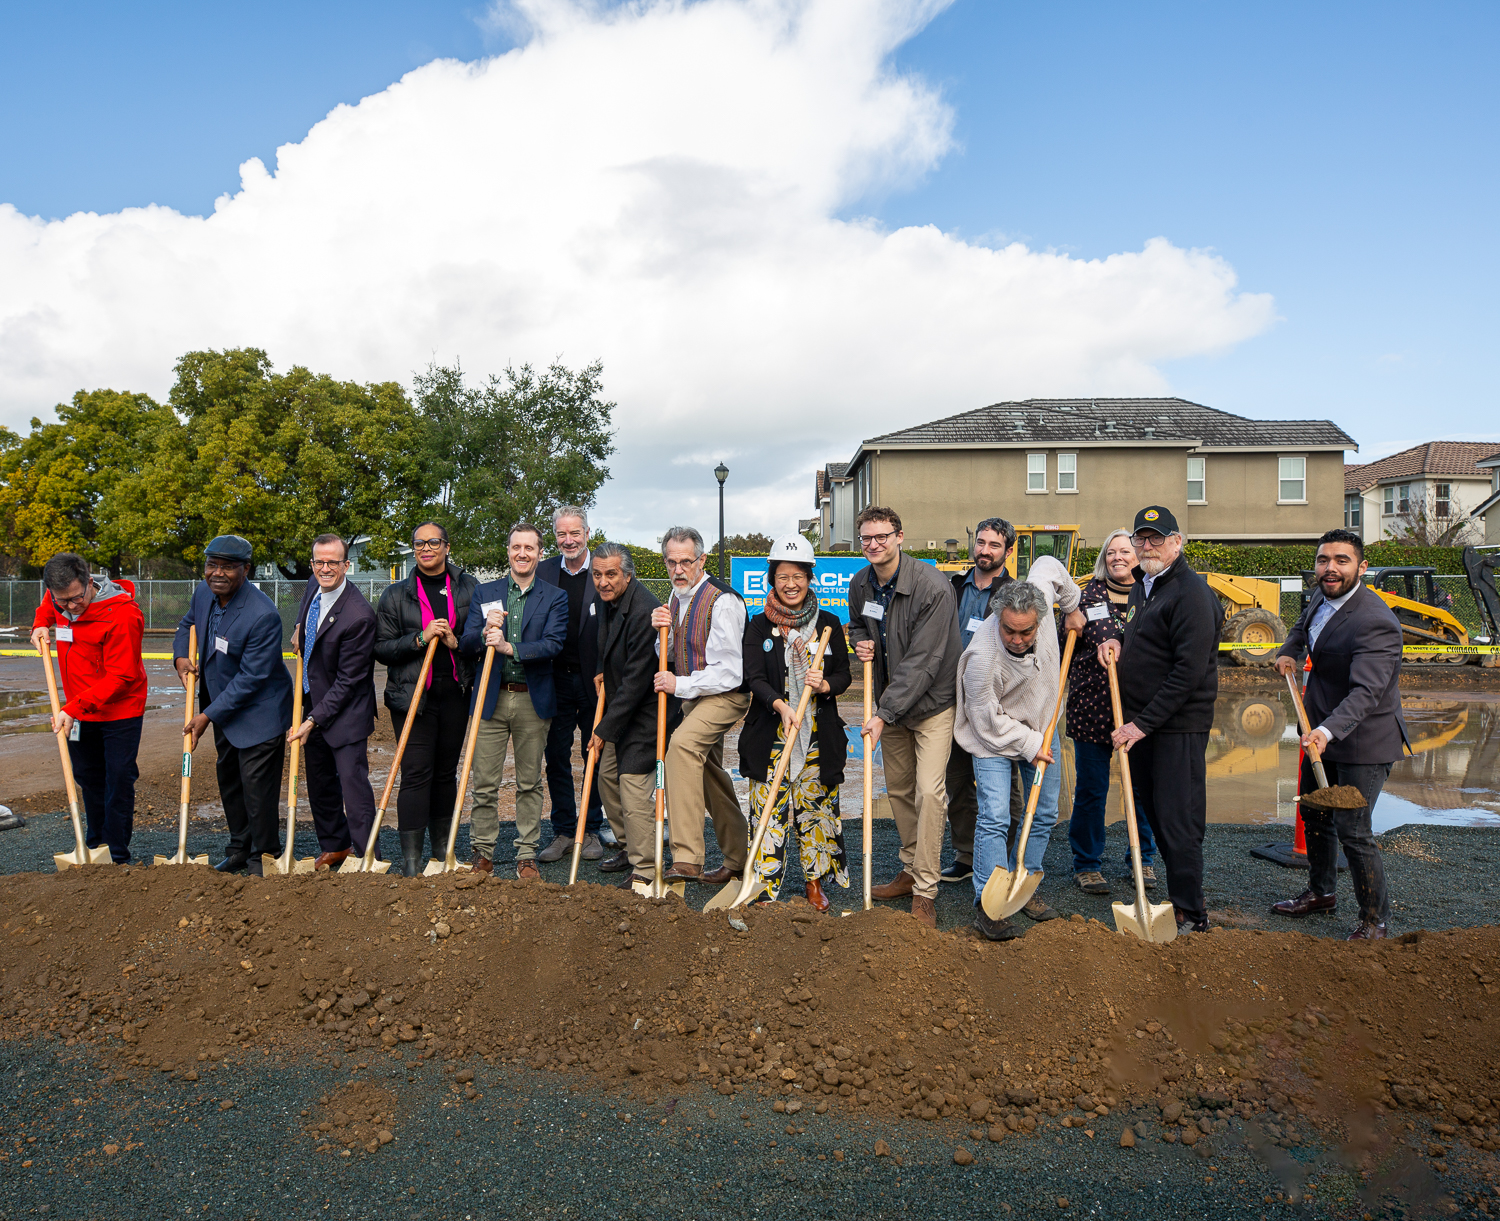 Colibri Commons groundbreaking ceremony with community members, image courtesy MidPen Housing and Blach